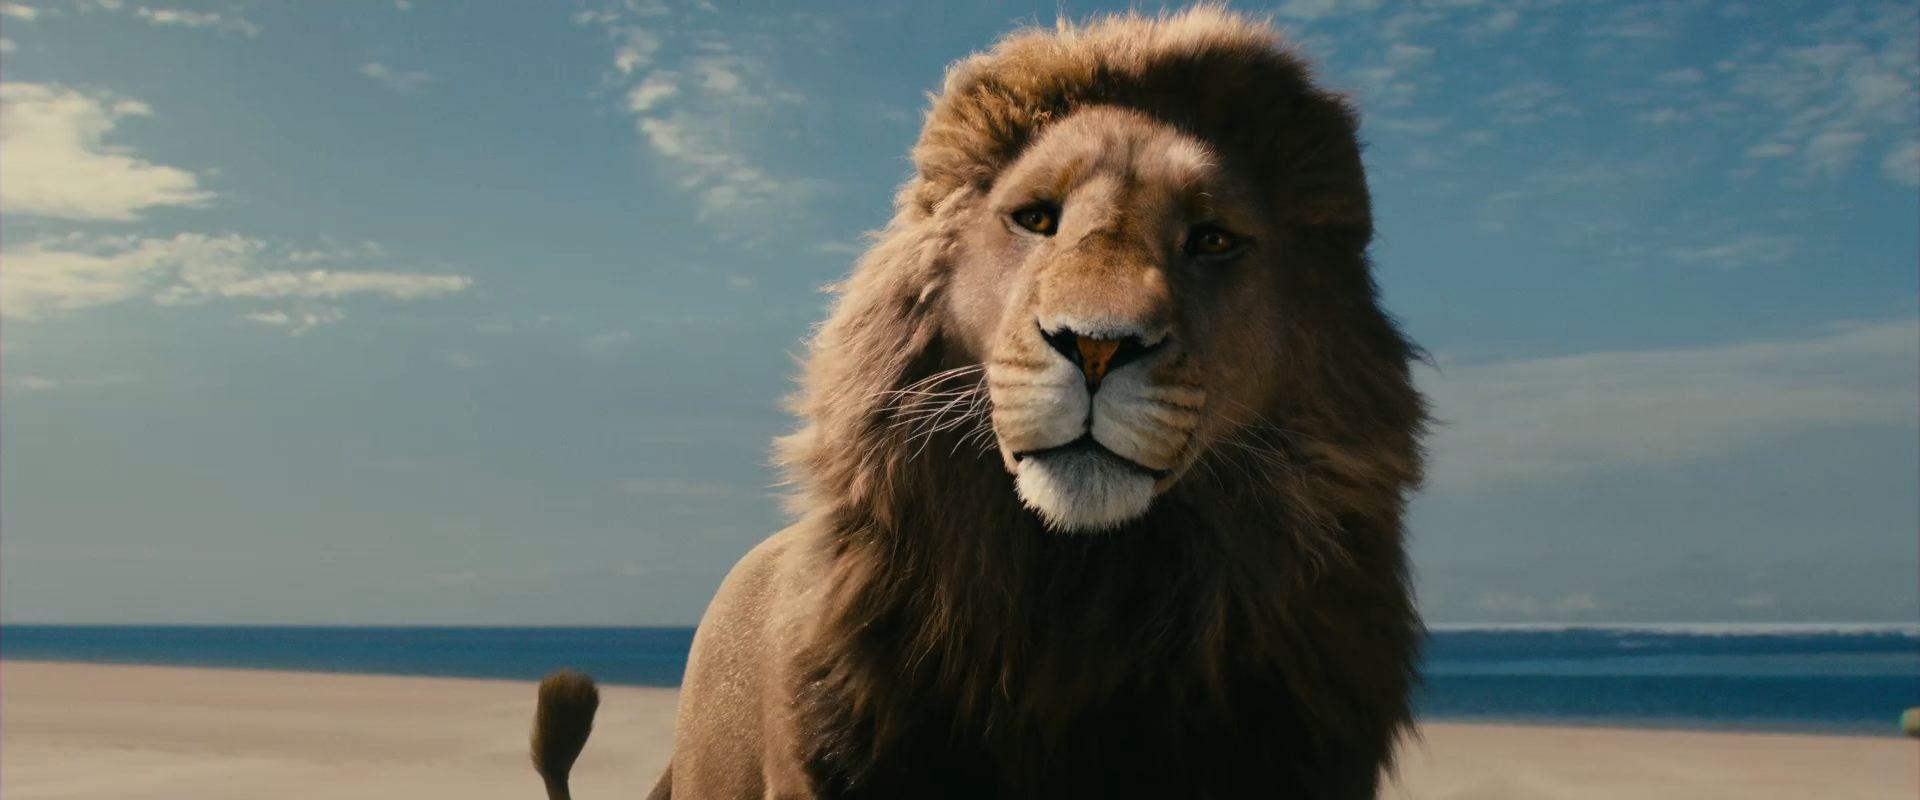 Aslan Lion 2 Chronicles Of Narnia Voyage Of The Dawn Treader